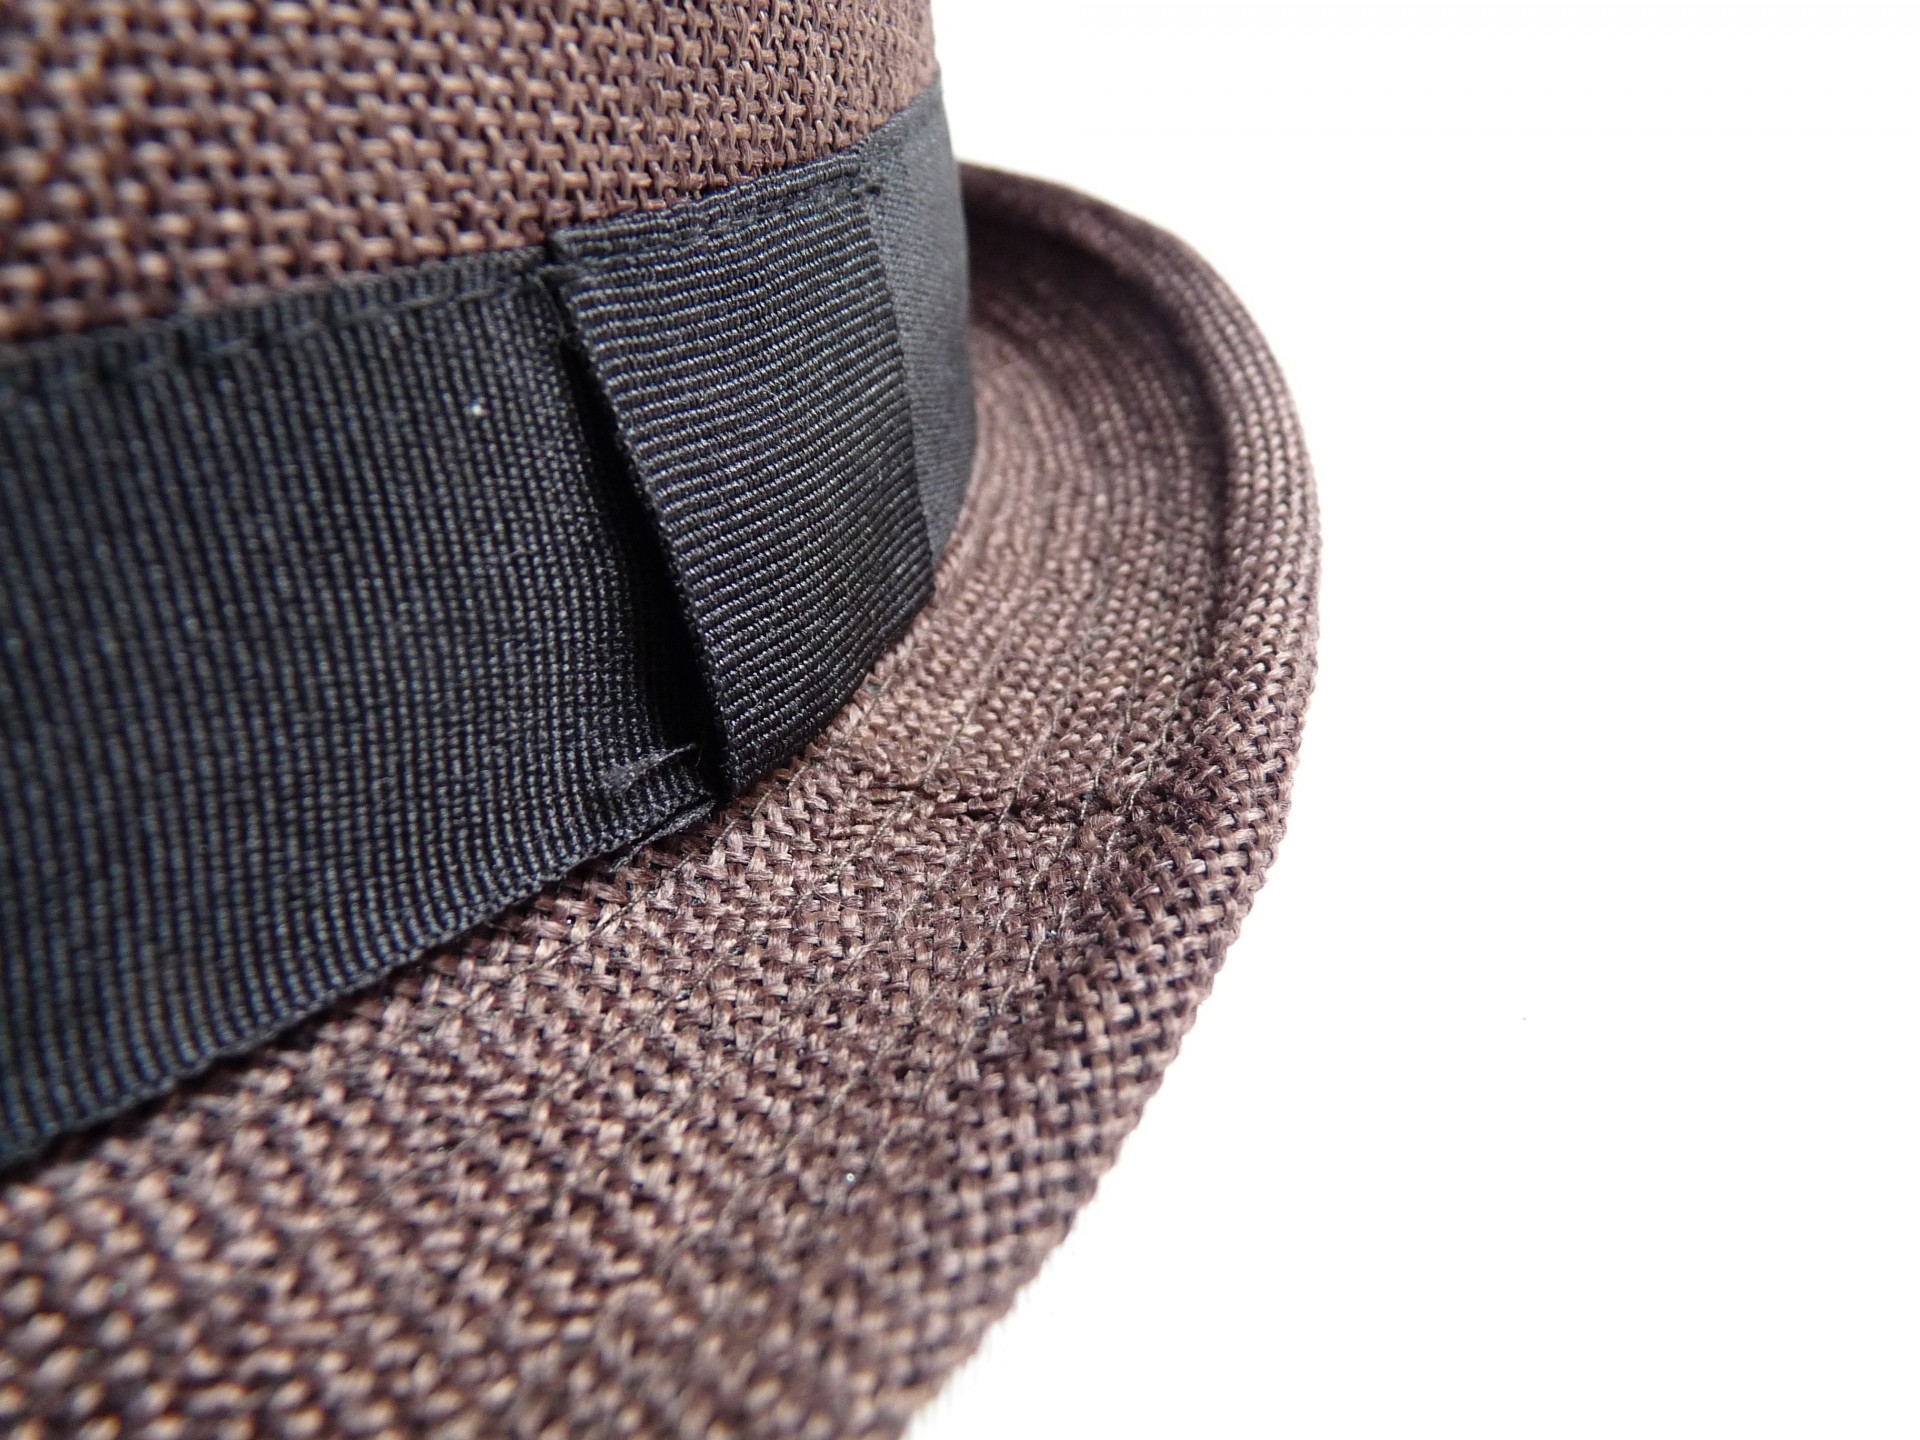 The edge of a classy hat.